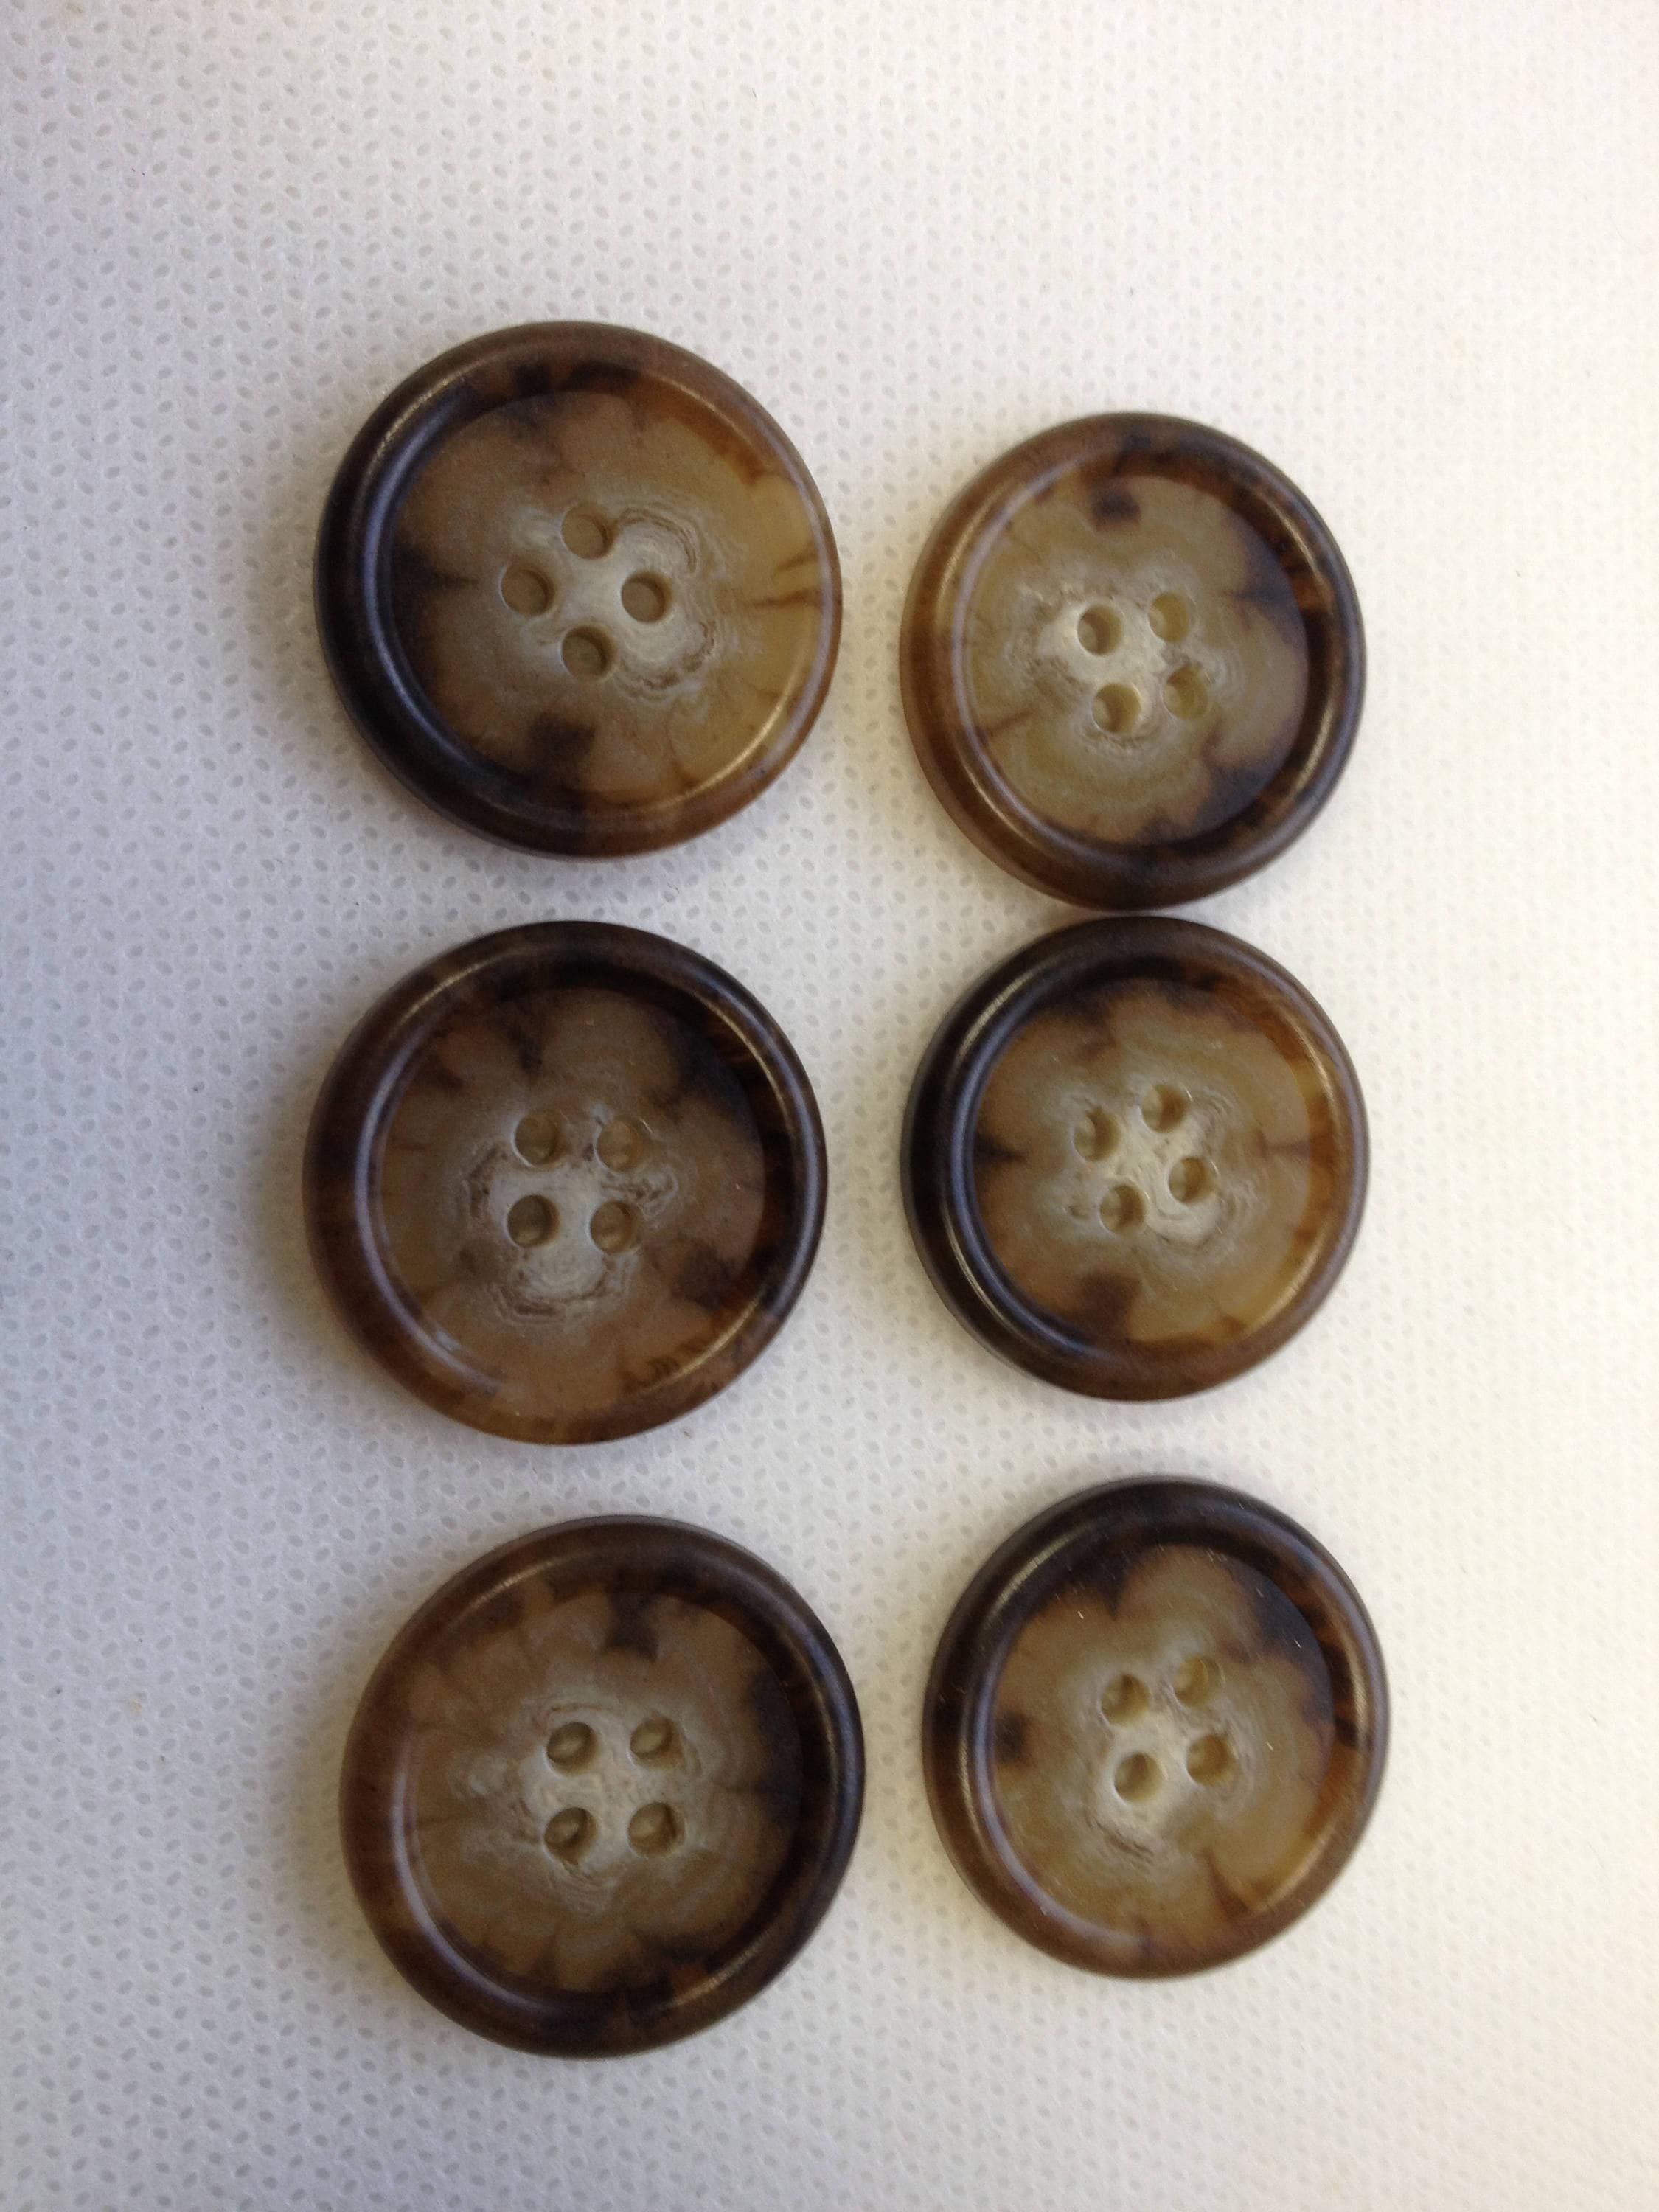 Lot of 50 Speckled Brown Faux Wood Buttons, Large 1 1/4 Round for Coat  jacket